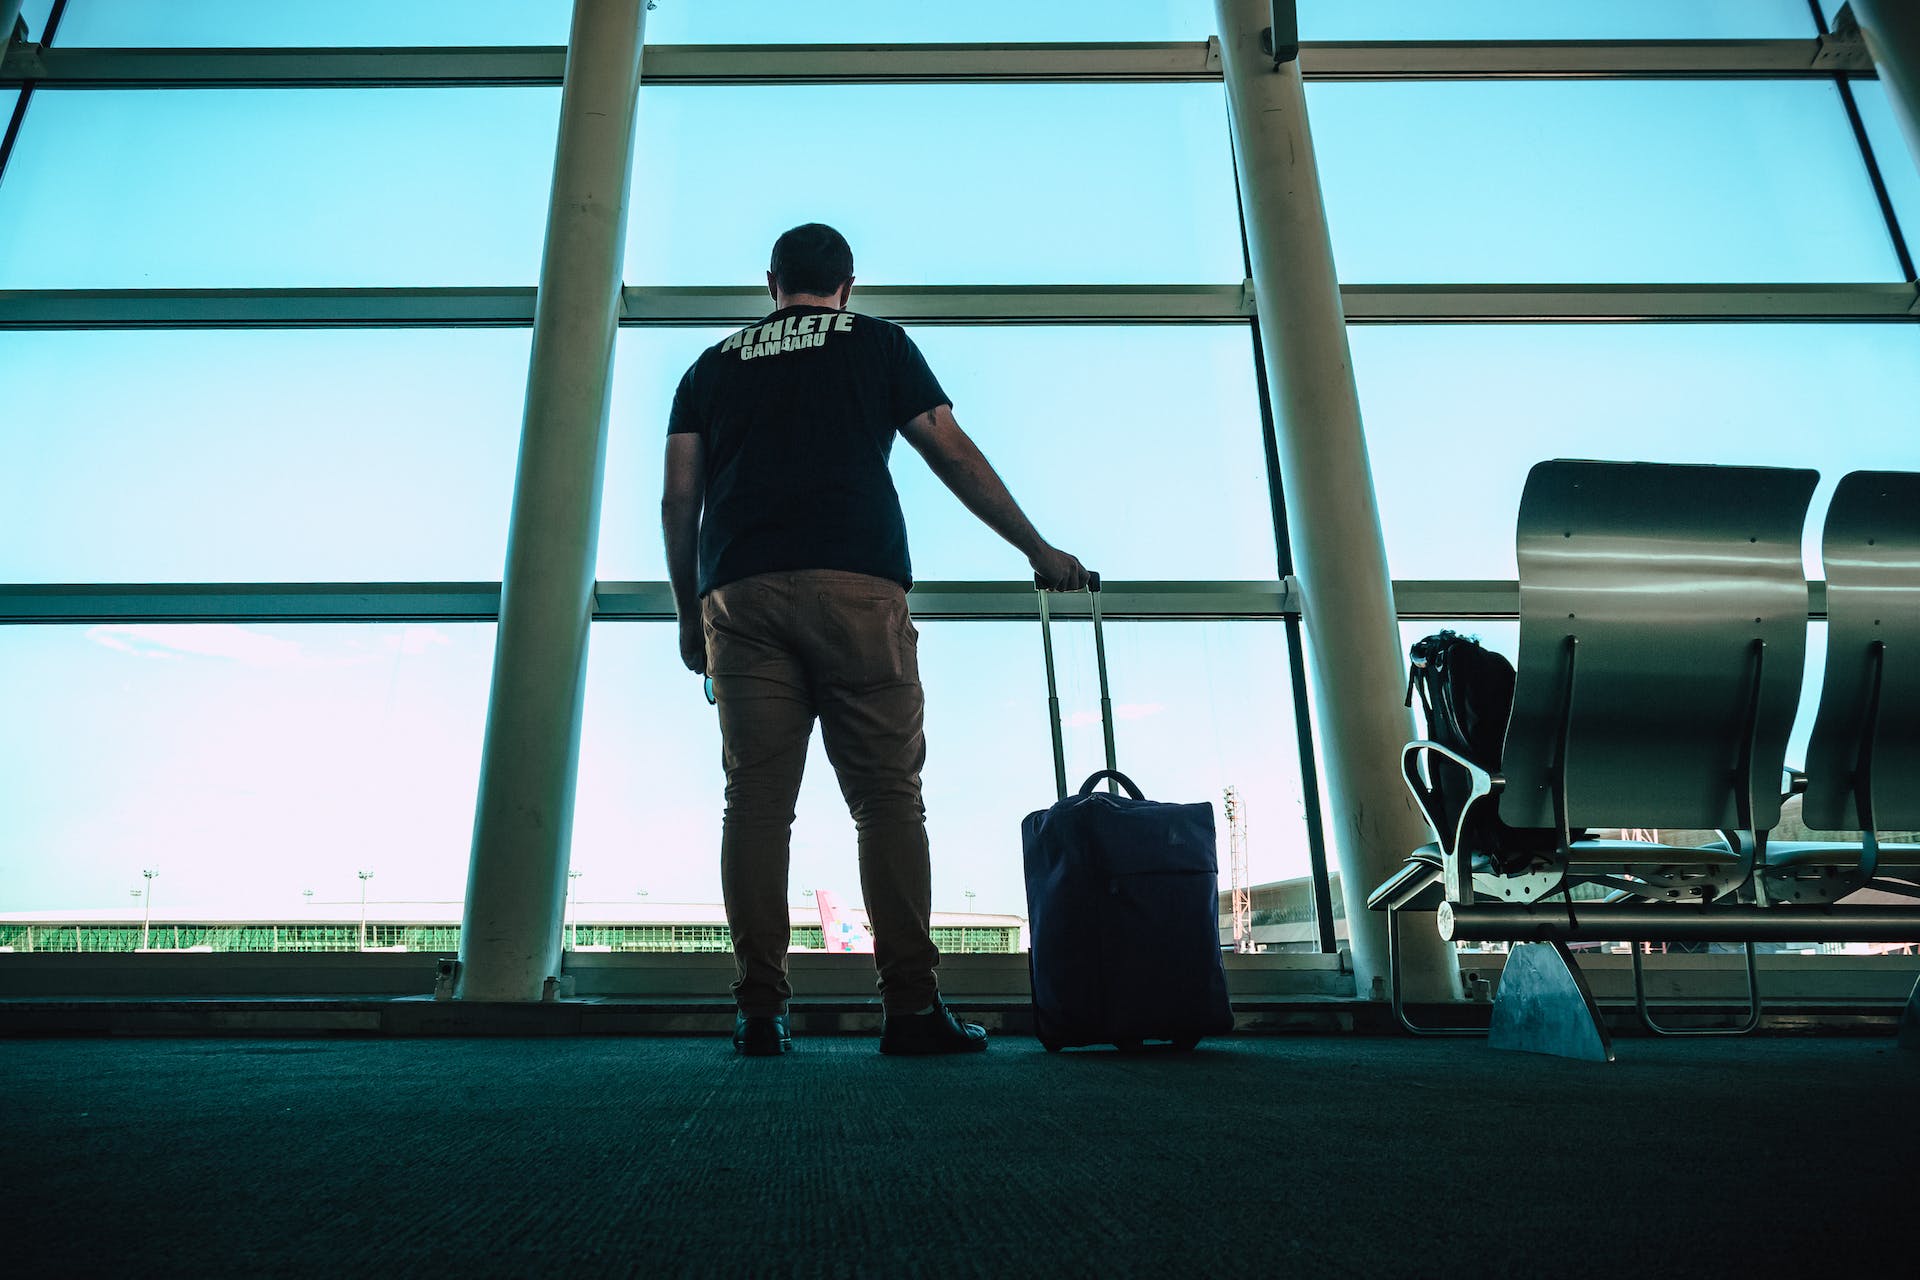 Silhouette of a man holding a bag | Source: Pexels